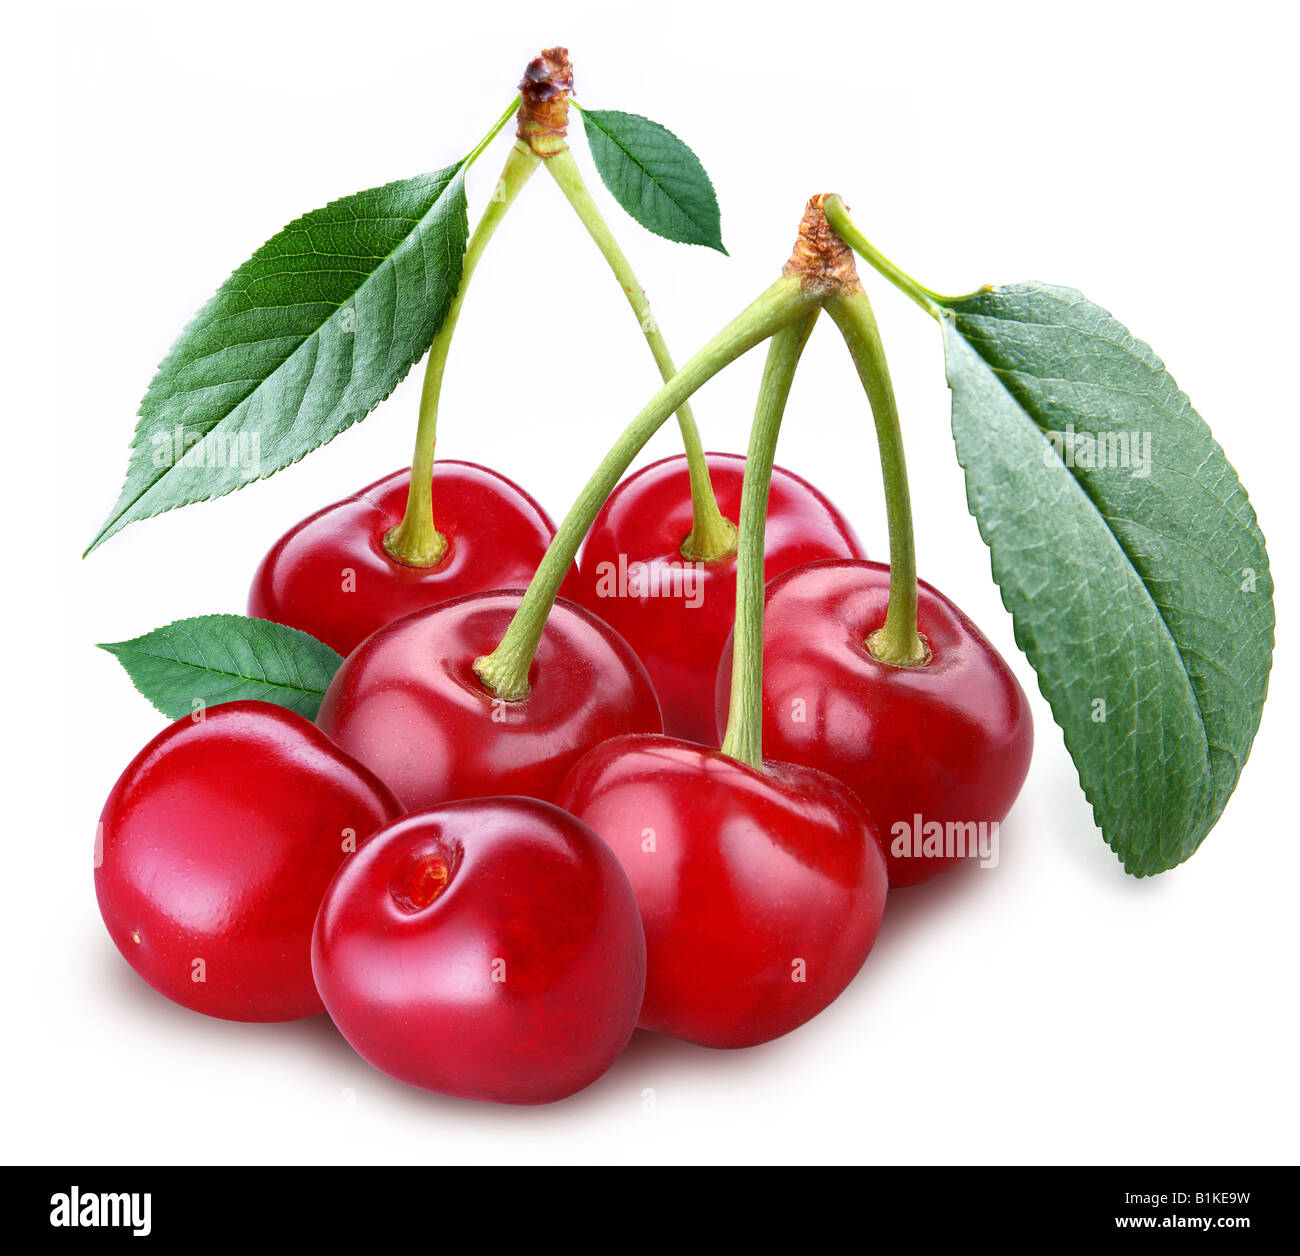 Cherry object on a white background Stock Photo